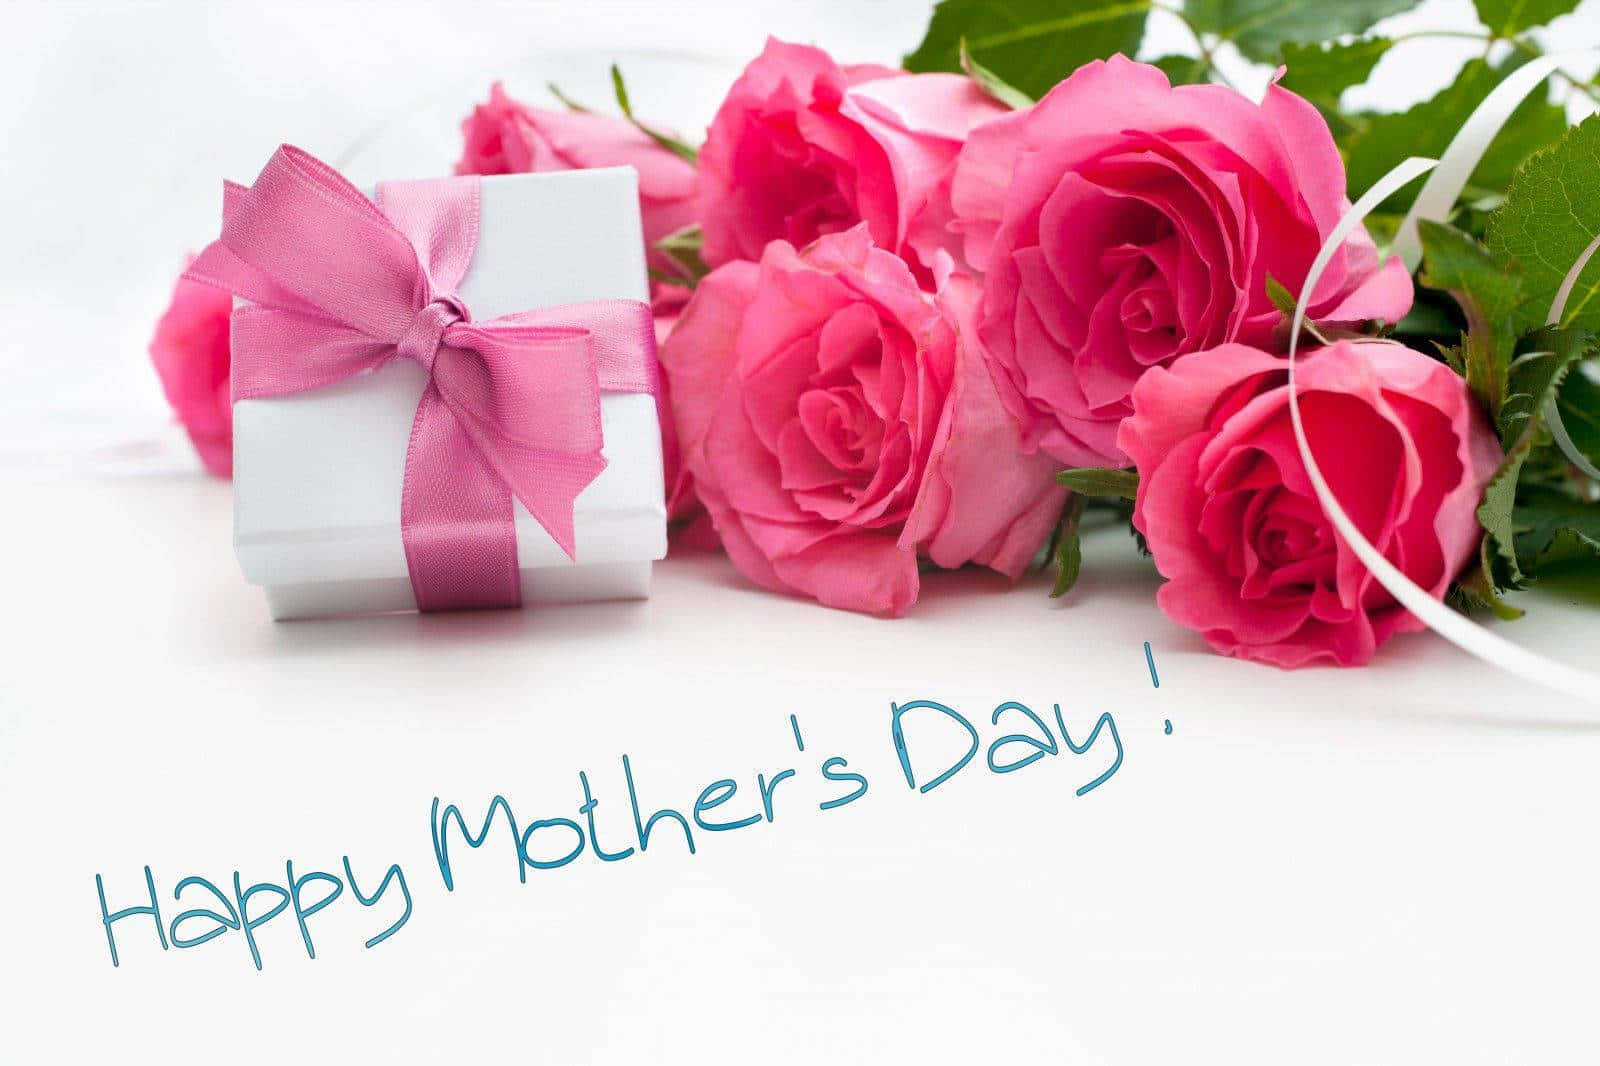 Happy Mothers Day Images With Roses And Gift